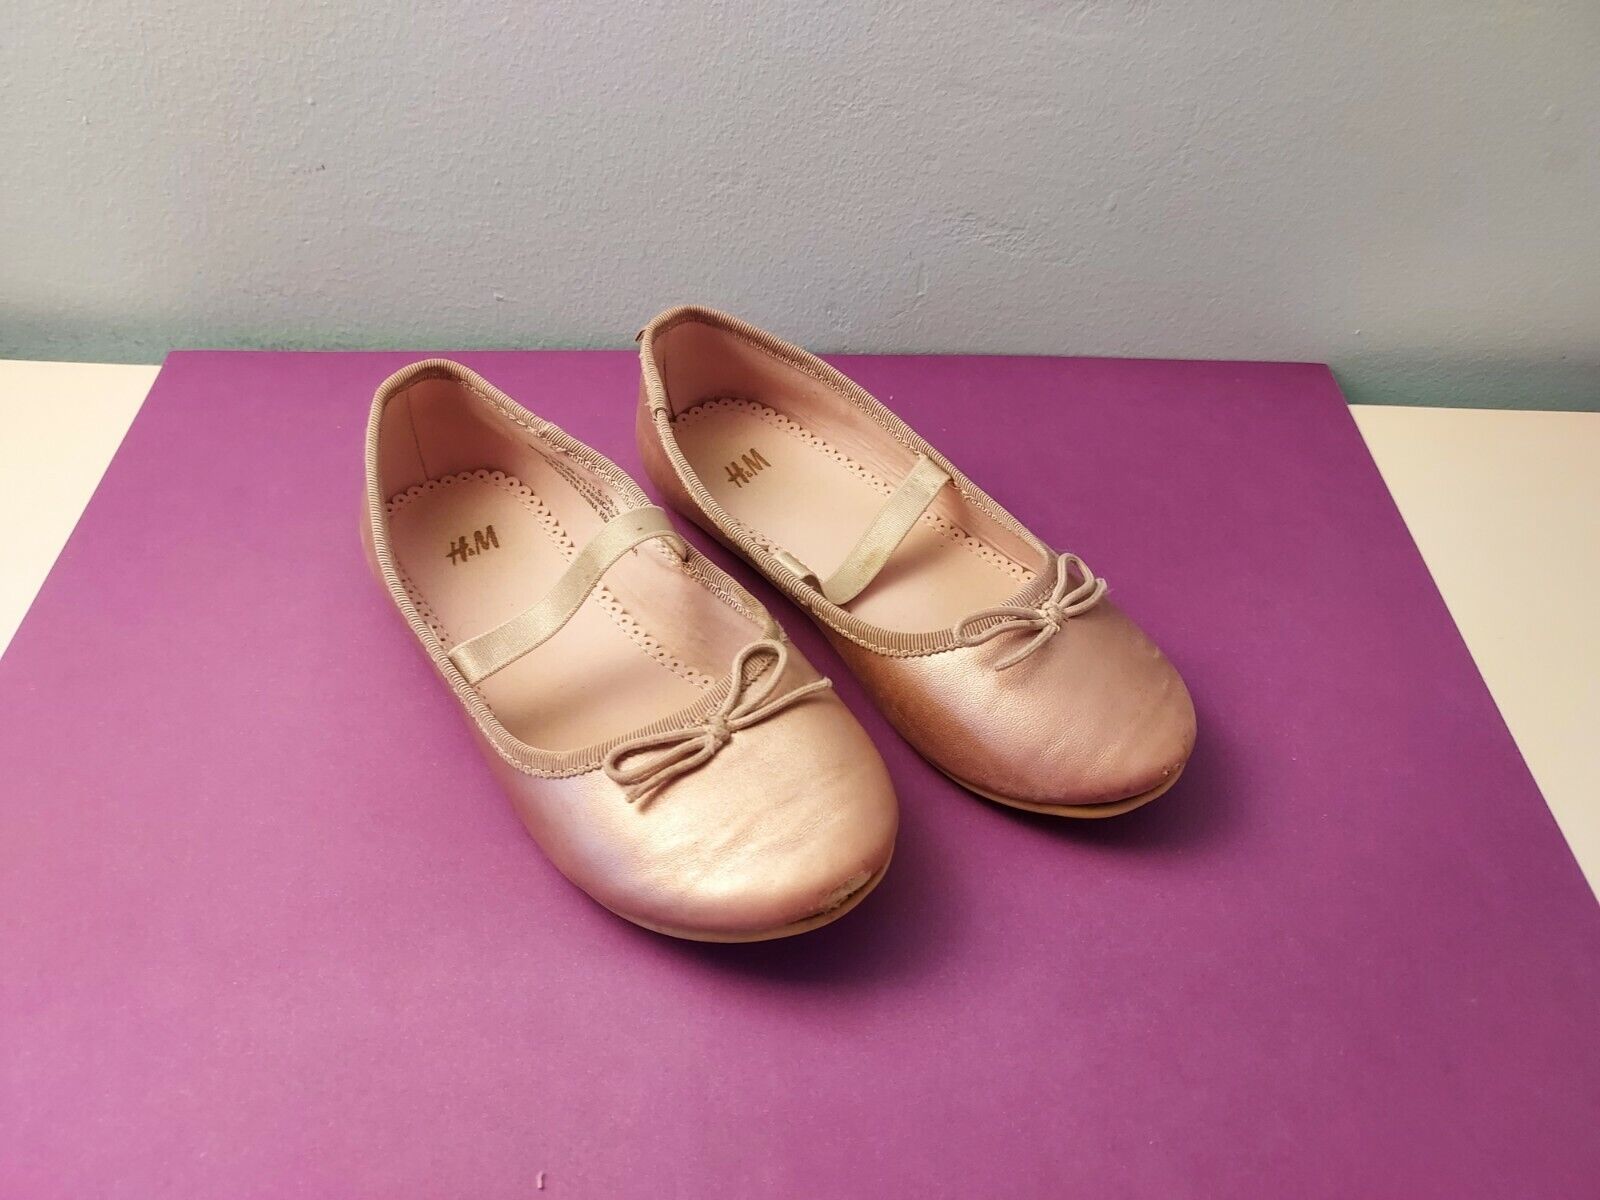 H&M girls shoes flats pink Size UK 11 child (EU 29) Excellent pair of H&M girl eBay